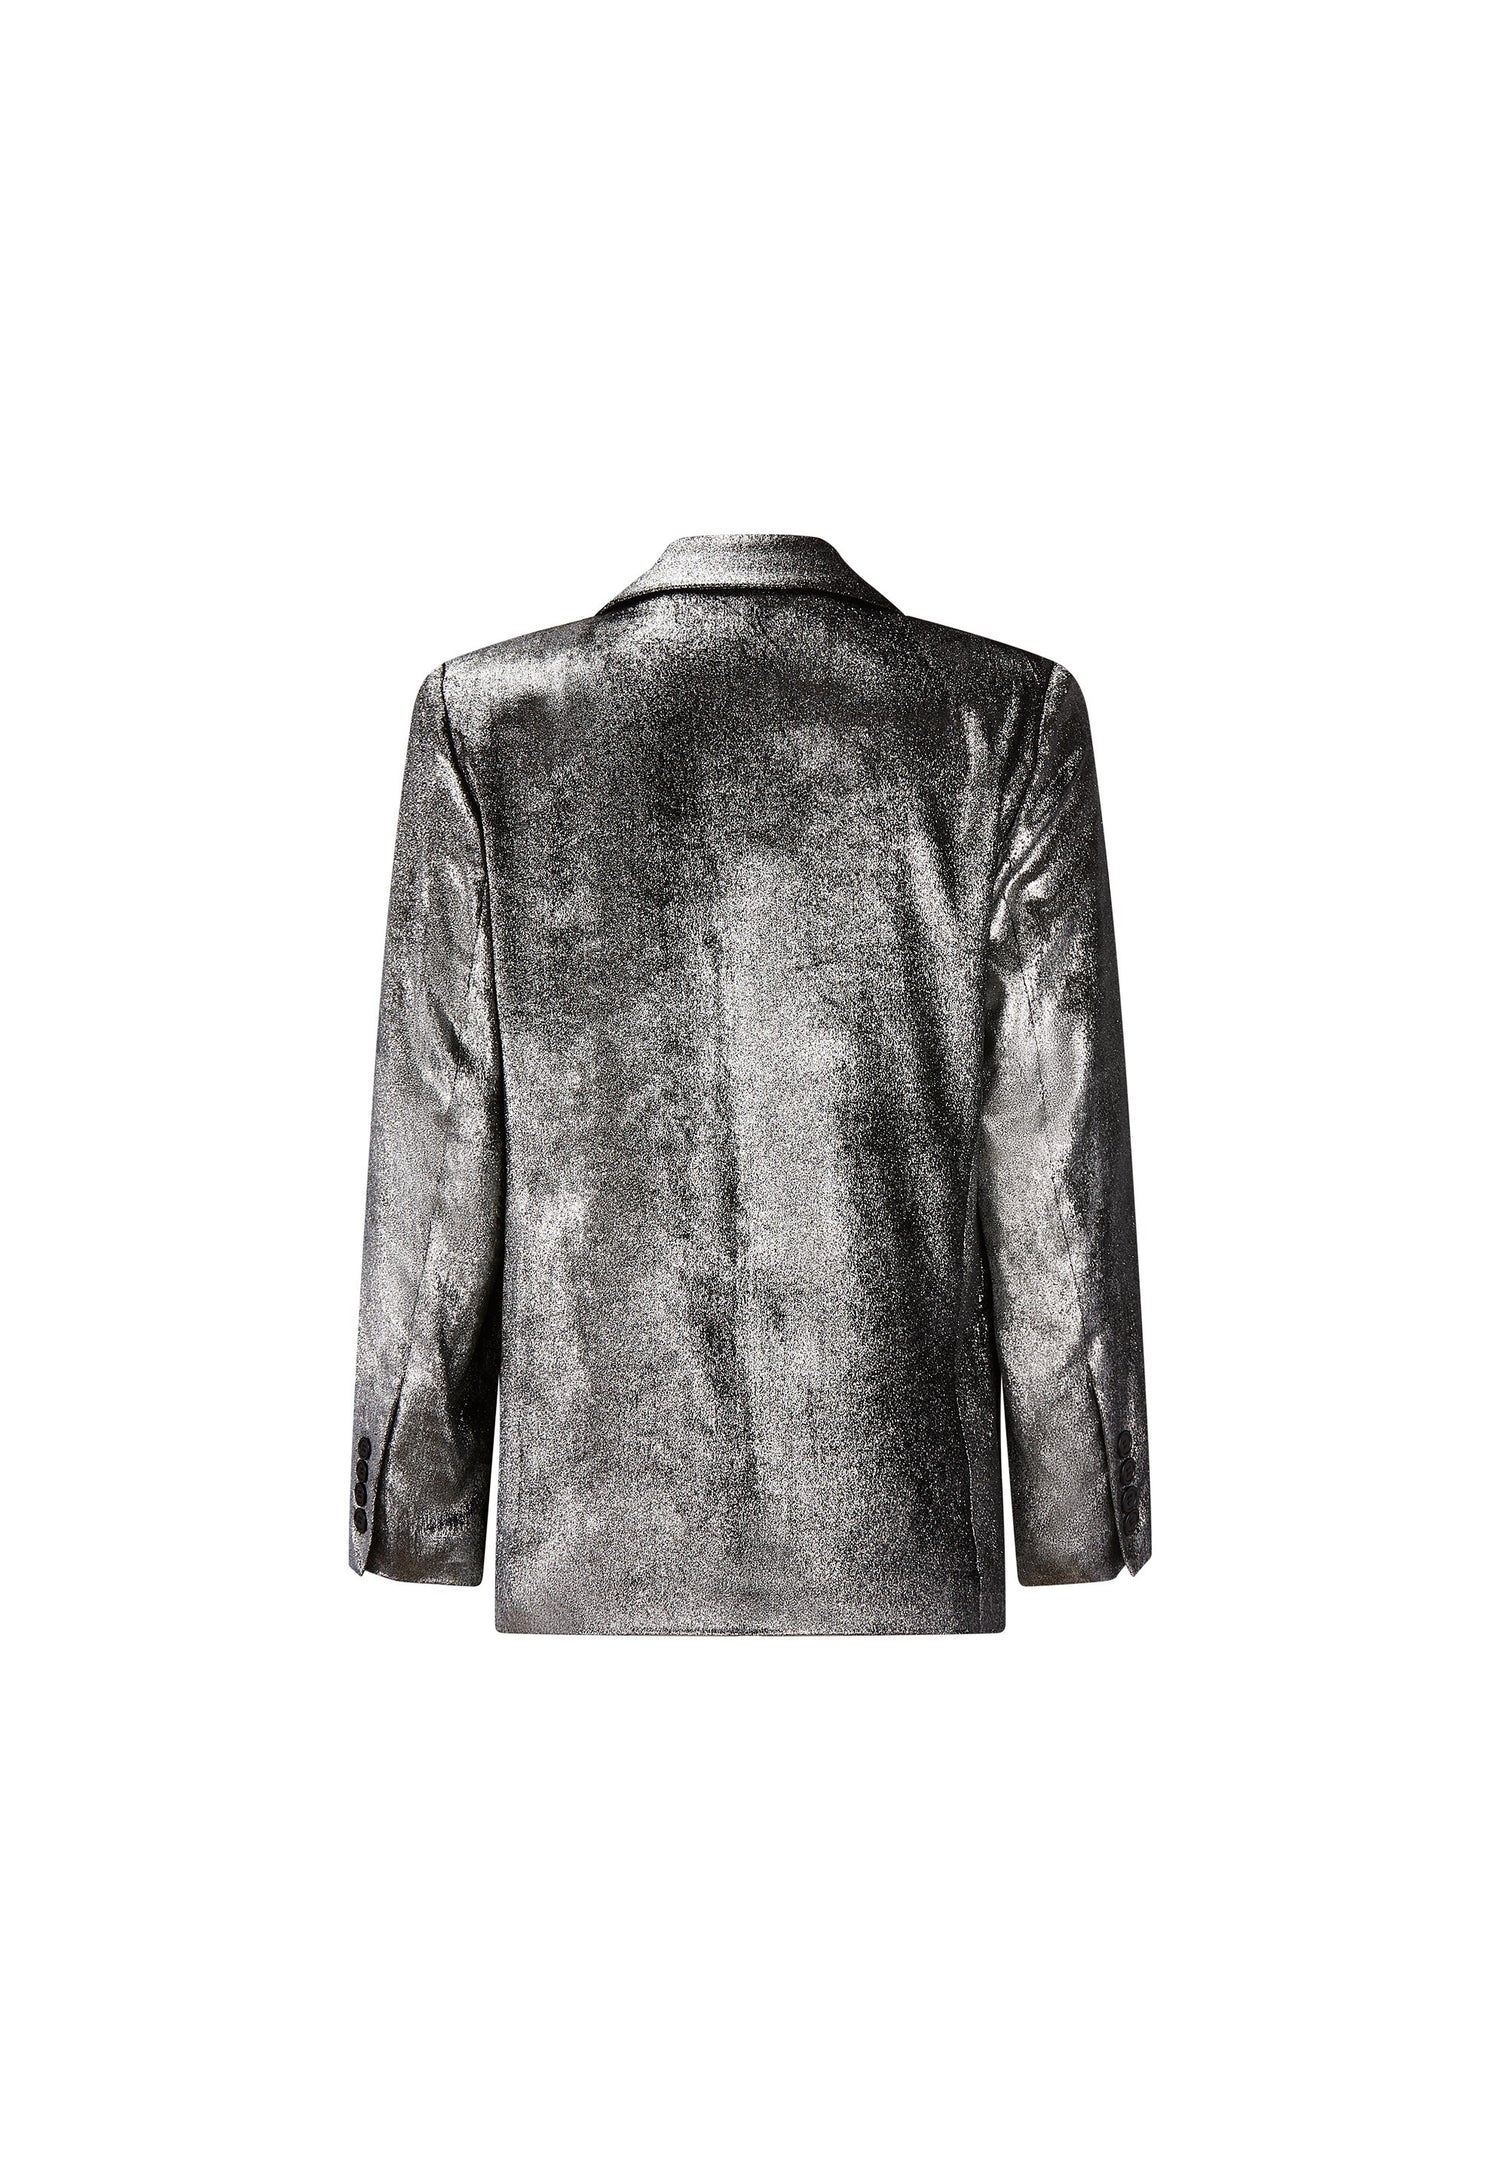 'STERLING' DOUBLE BREASTED JACKET -  - Libertine